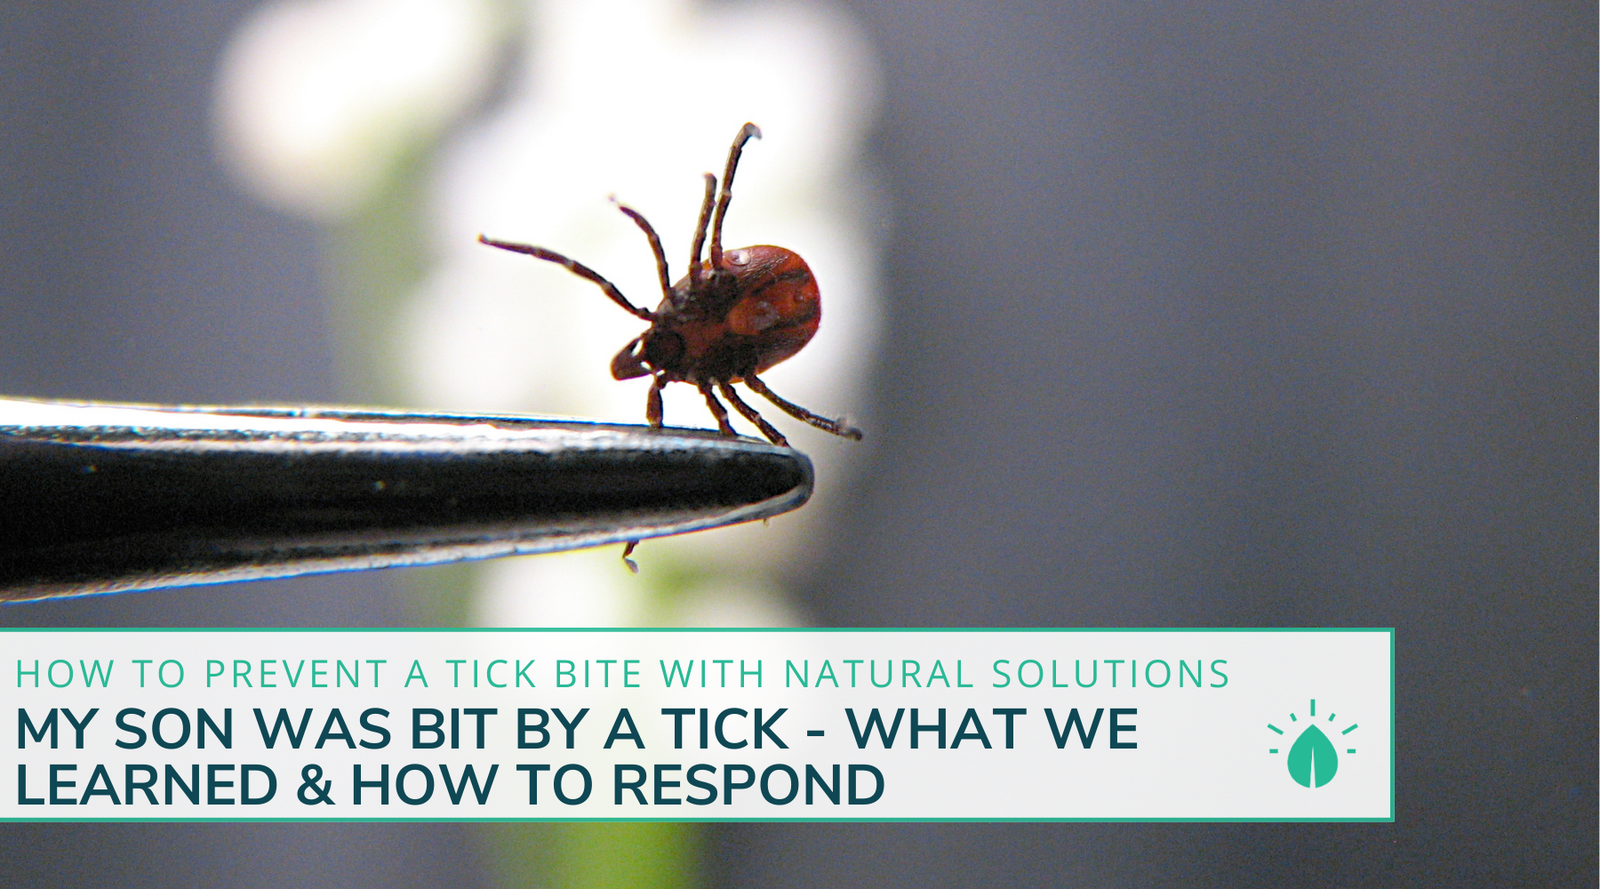 My Son Was Bit By A Tick... What We Learned & How To Respond